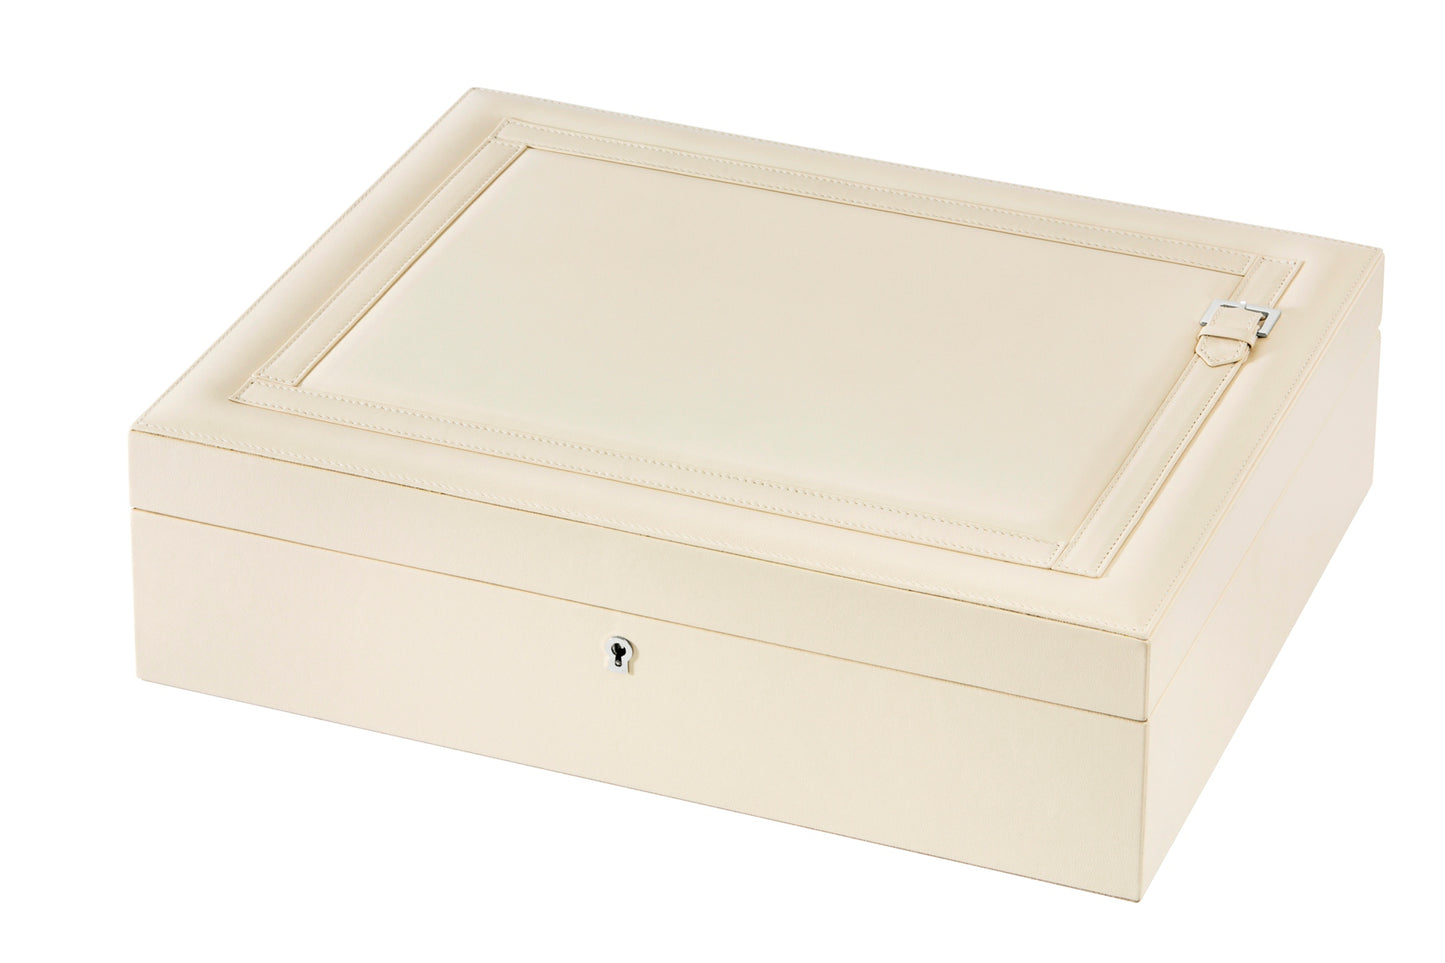 Riviere Mila Leather Jewelry Box with Dual Removable Trays | Elegant Design with 'Belt' Decoration in Gold | Double Removable Tray for Organizing Jewelry | Suede Lining for Added Luxury | Explore a Range of Luxury Jewellery Boxes at 2Jour Concierge, #1 luxury high-end gift & lifestyle shop